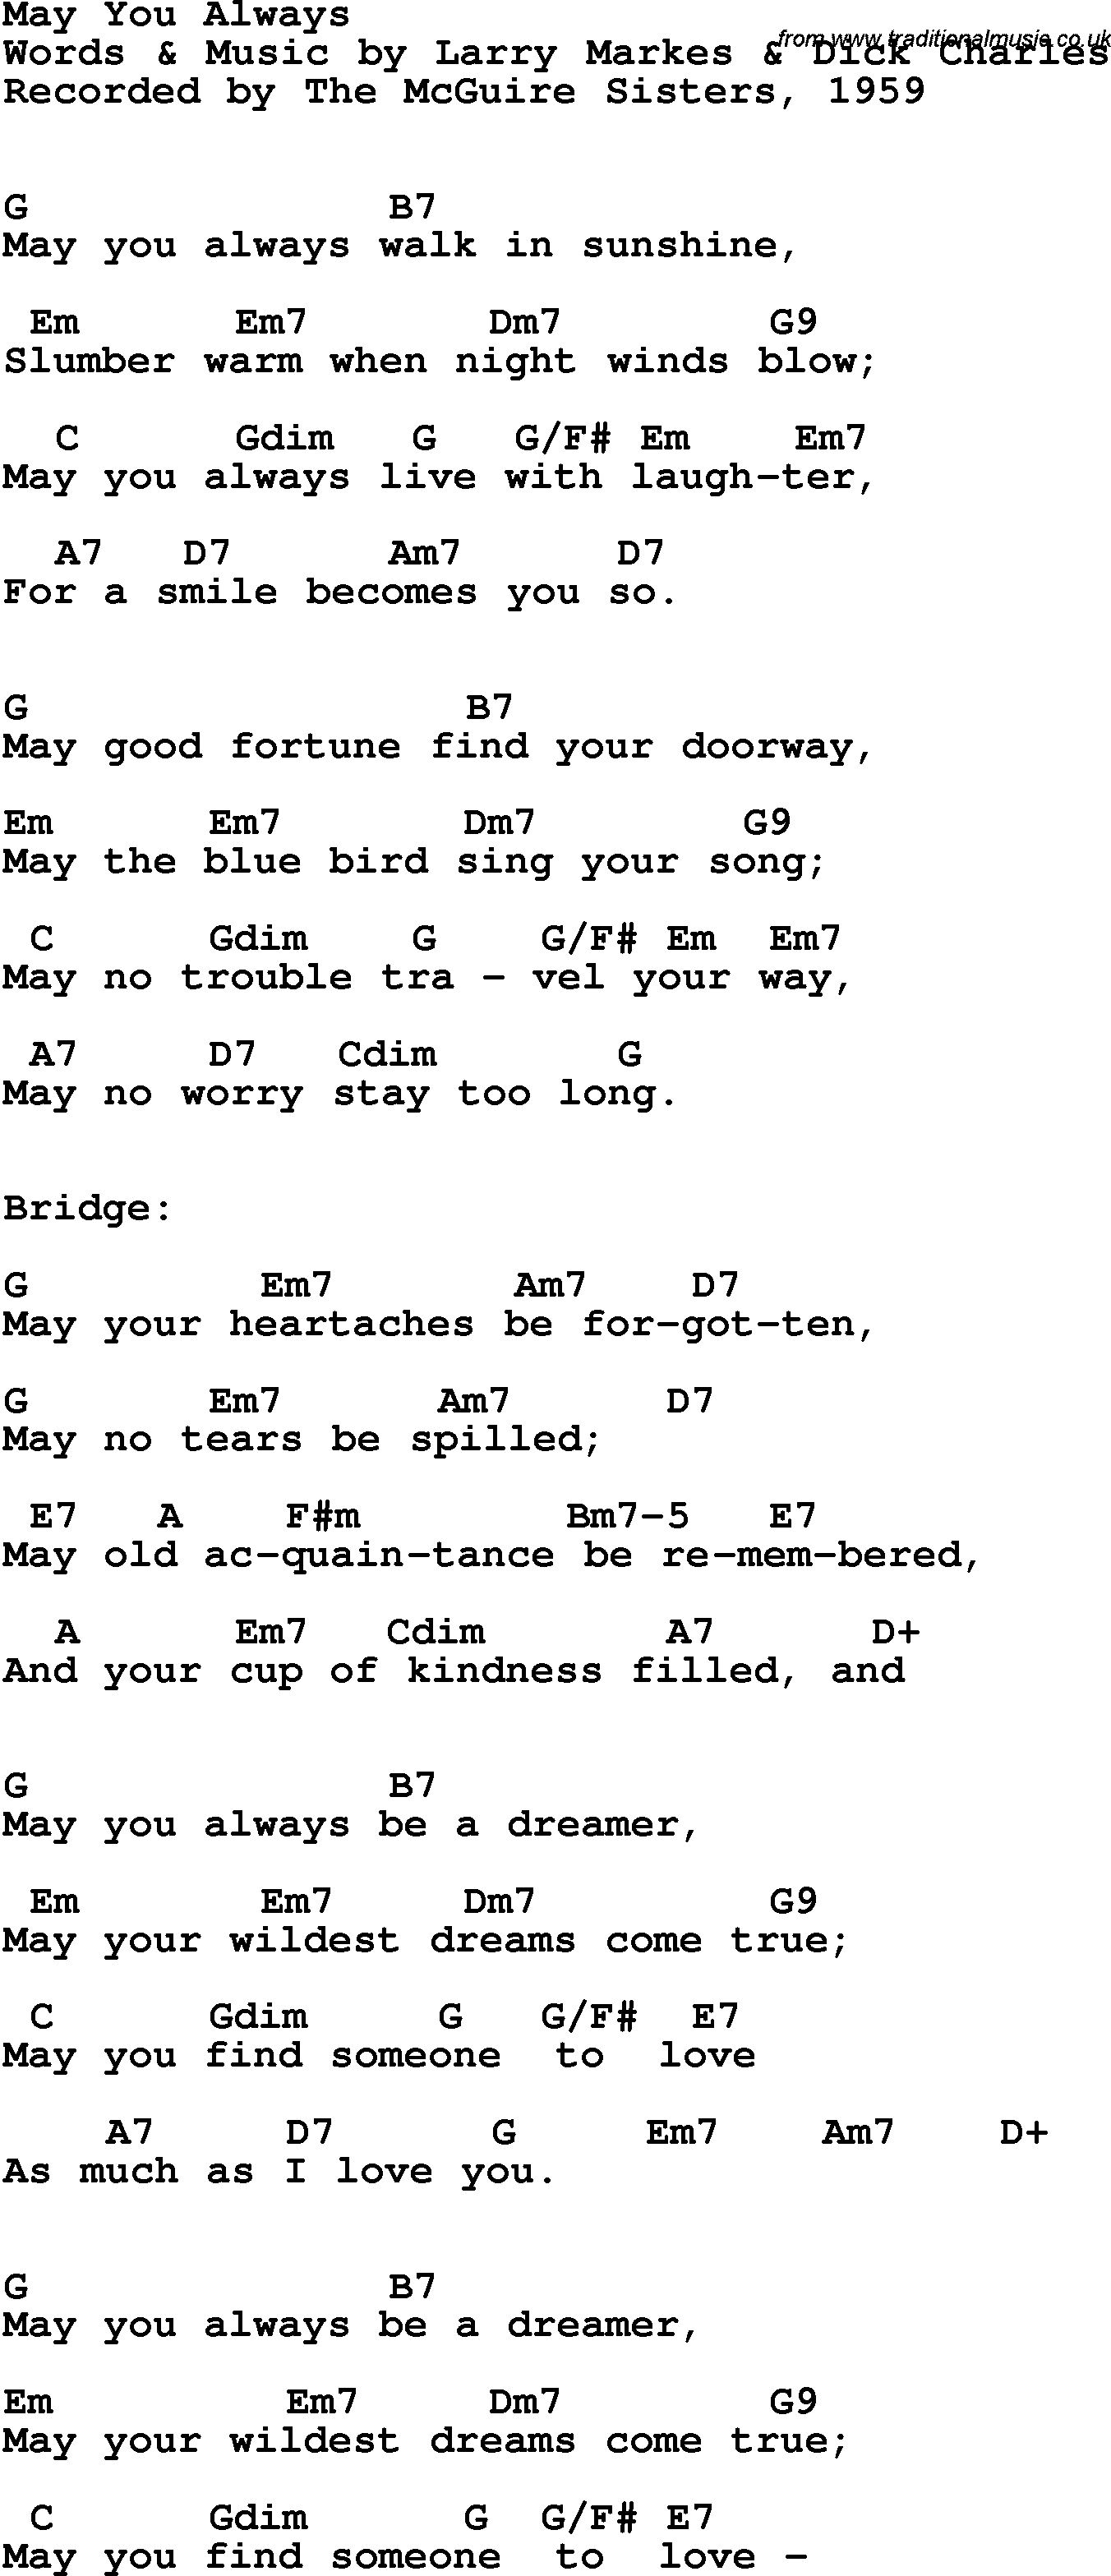 Song Lyrics with guitar chords for May You Always - The Mcguire Sisters, 1959